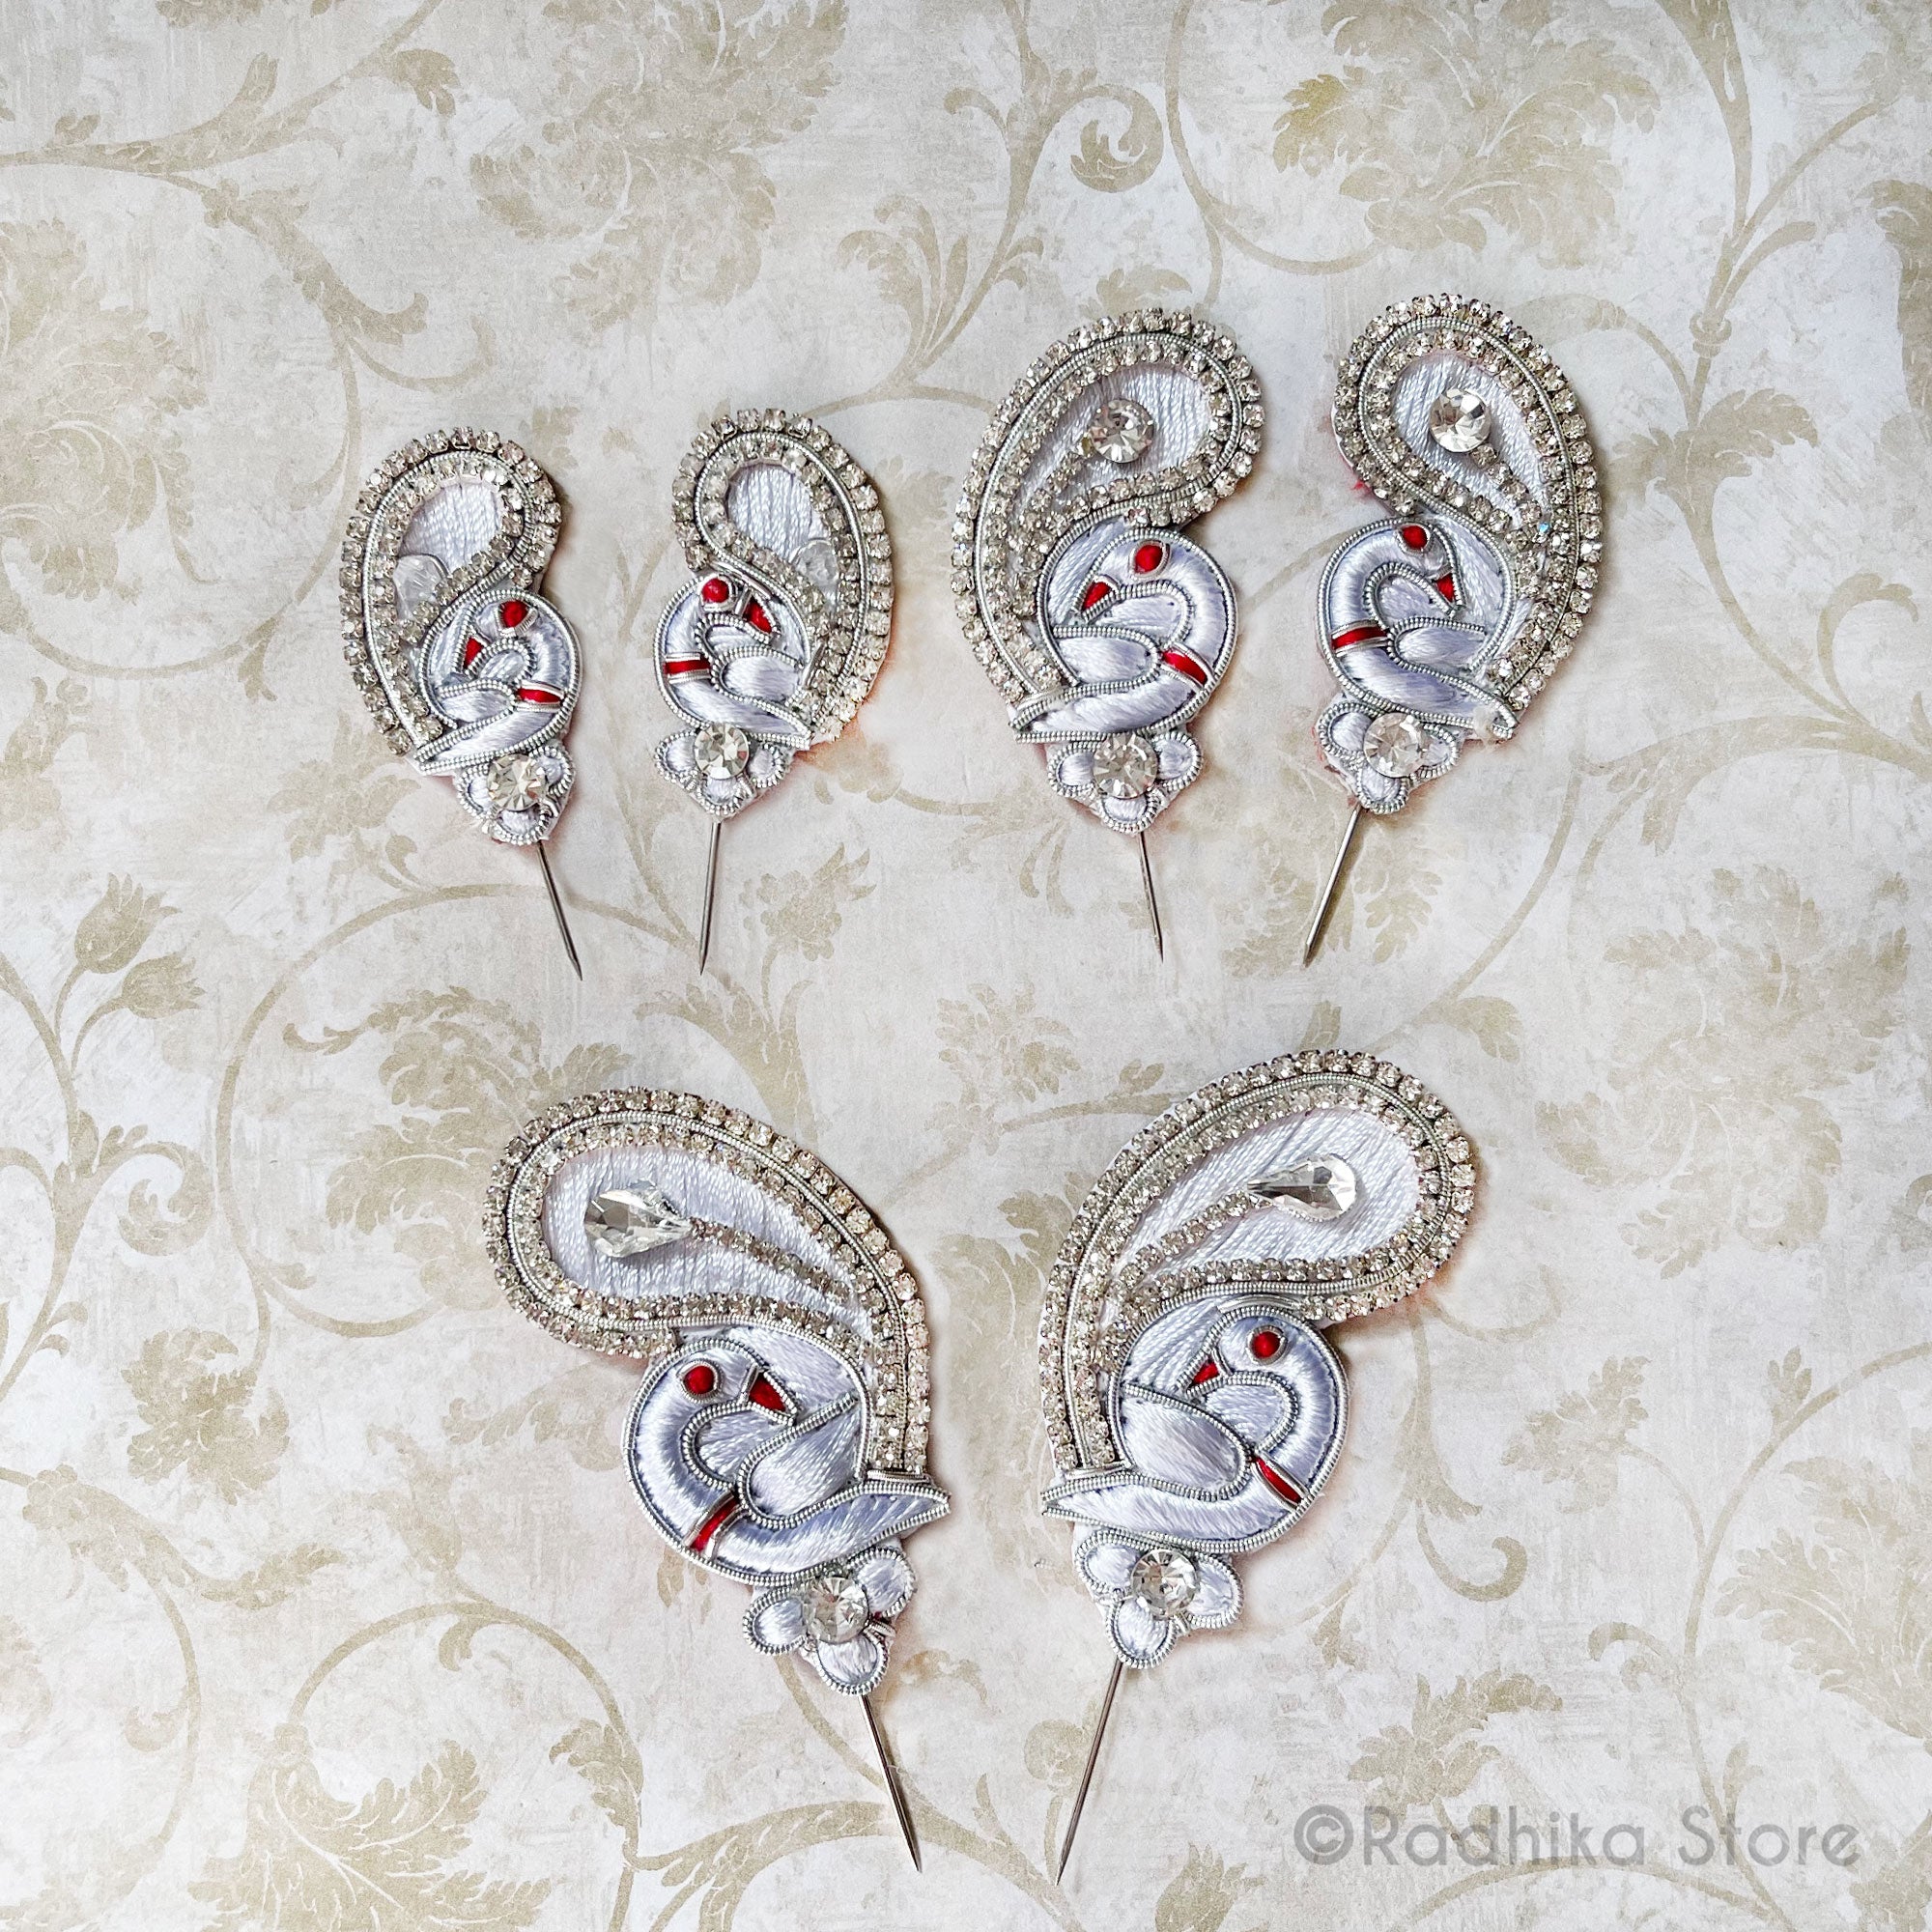 Silver Adorning Peacocks - Embroidery Turban Pins - Set of 2